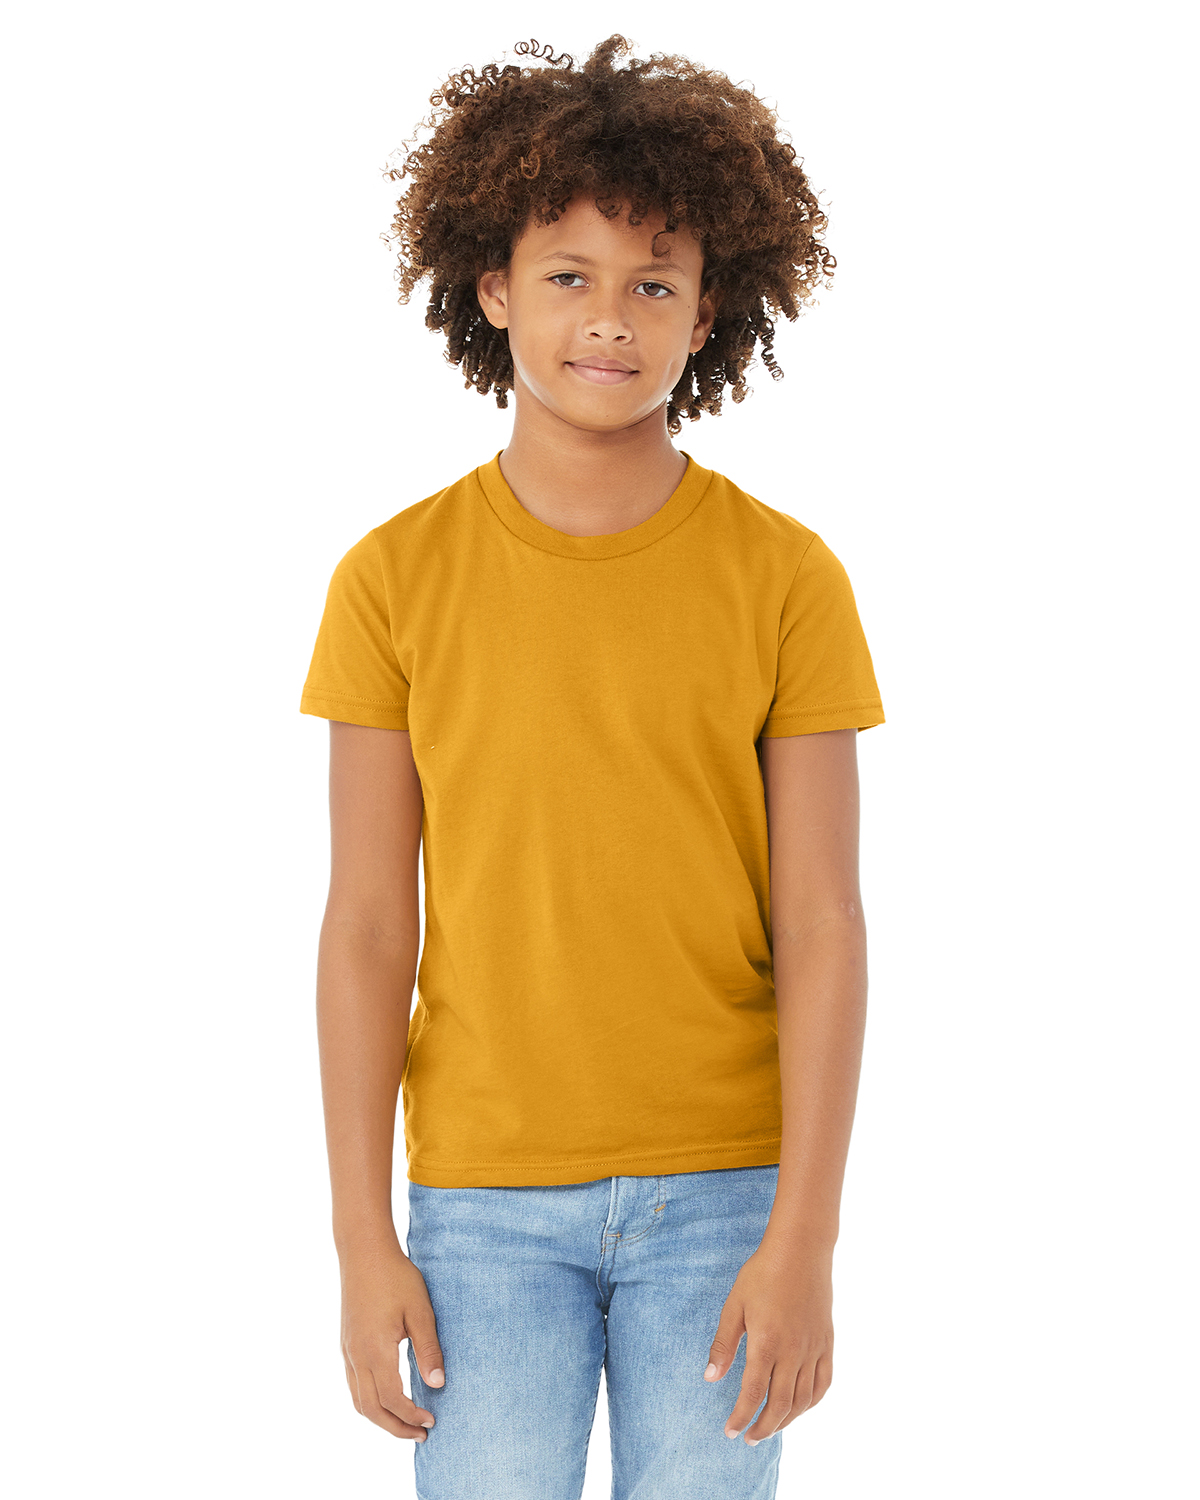 Bella Canvas Youth Jersey Short-Sleeve T-Shirt-3001Y 